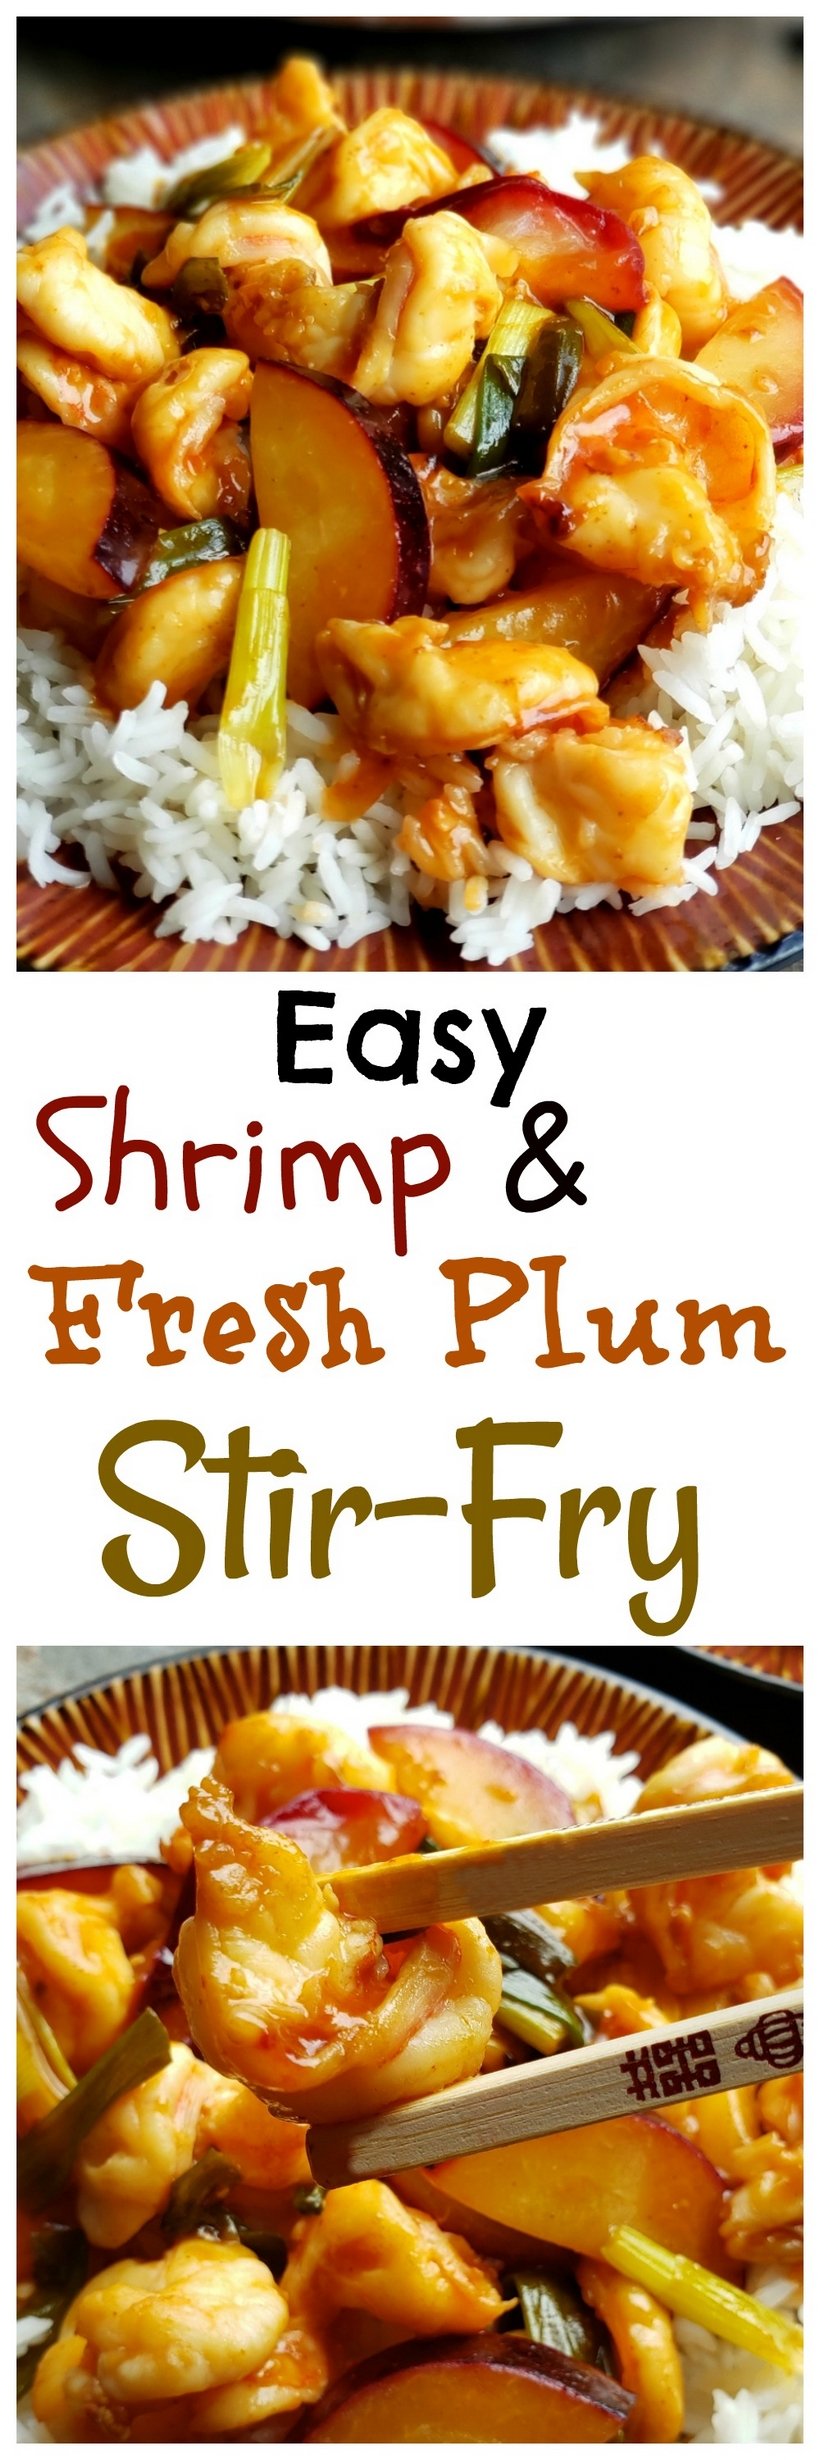  Easy Shrimp and Fresh Plum Stir-Fry in text with two photos of stir-fry and shrimp being picked up with chopsticks.